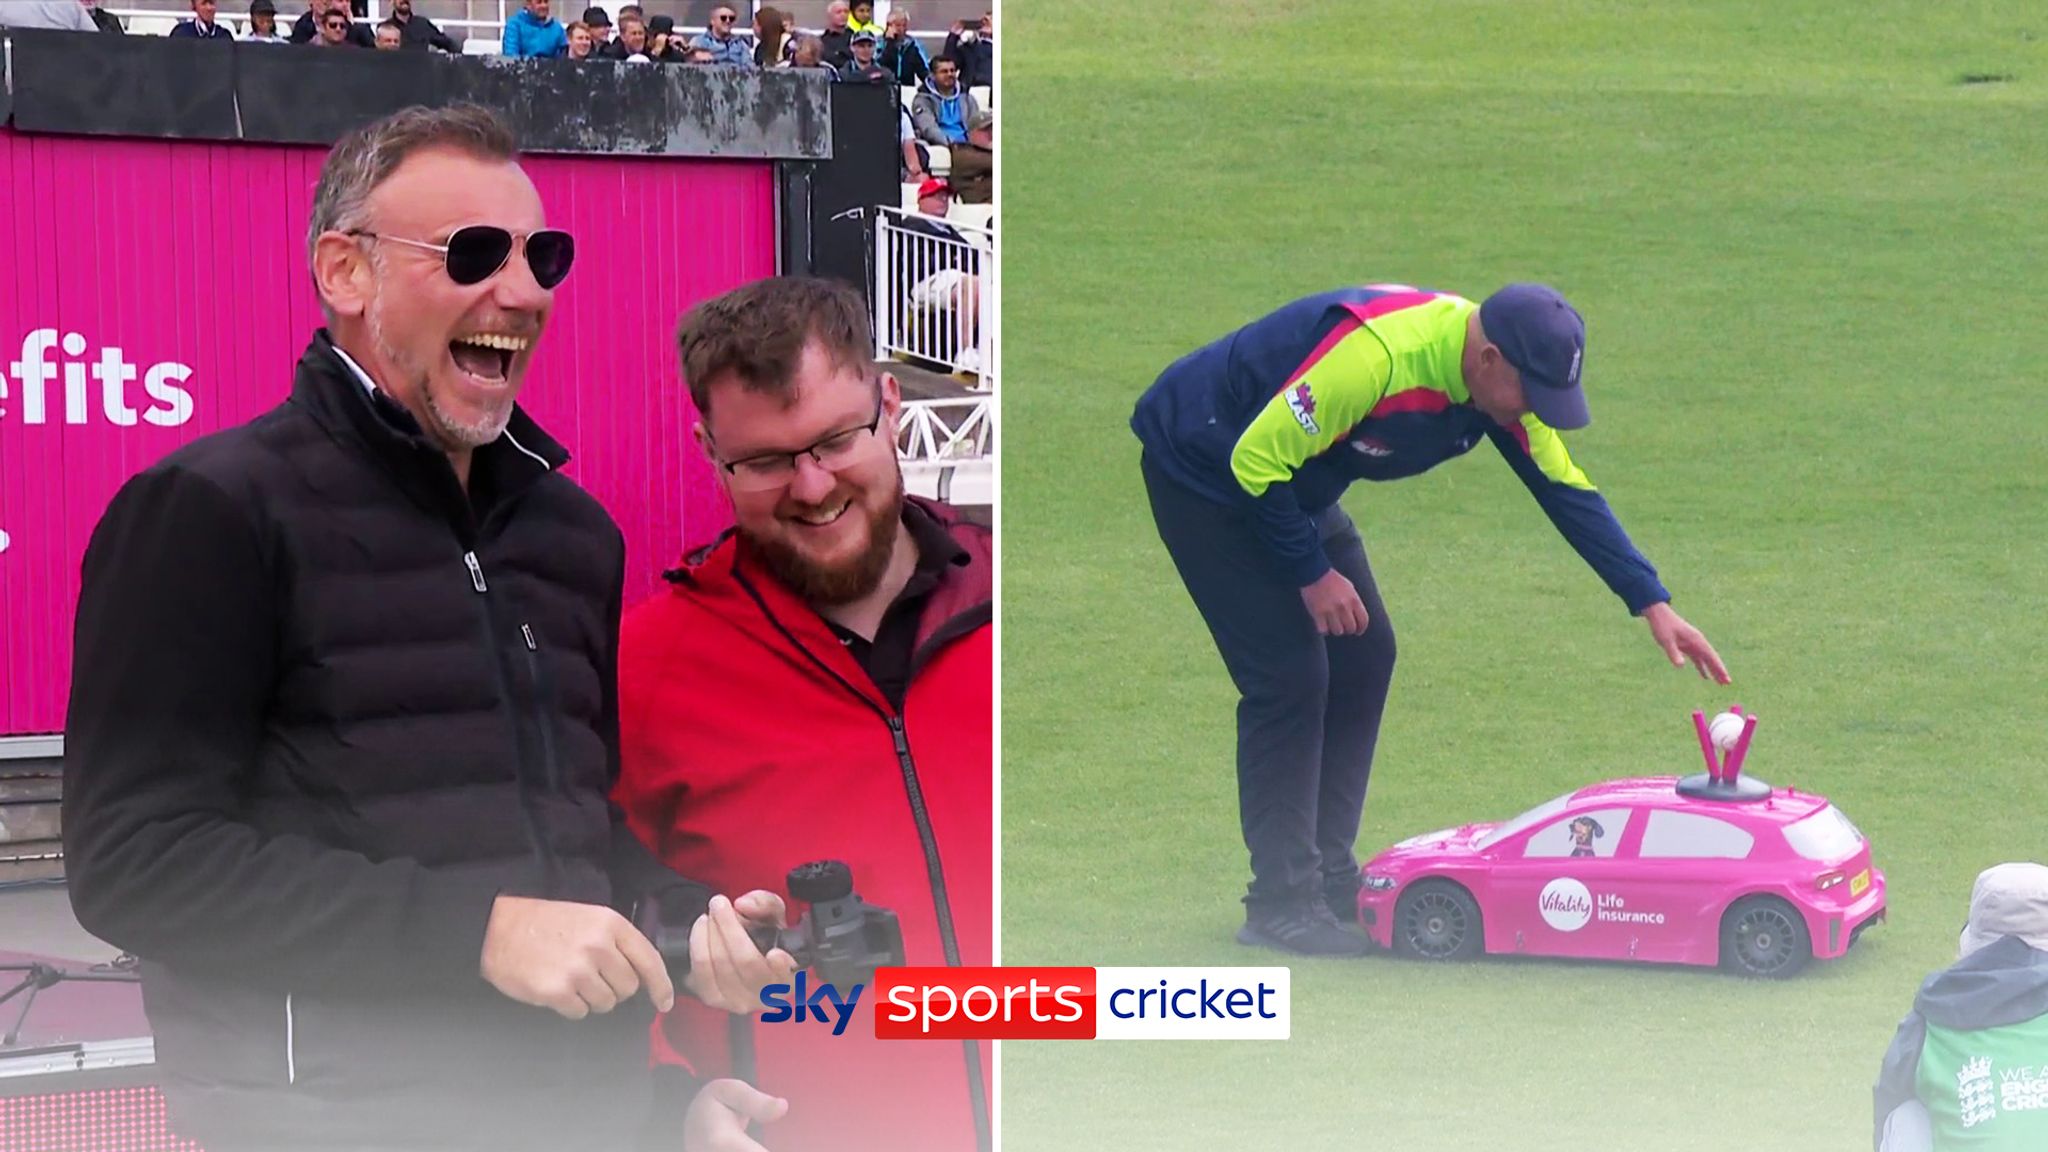 Hes playing games Daggers pranks the umpire! Video Watch TV Show Sky Sports